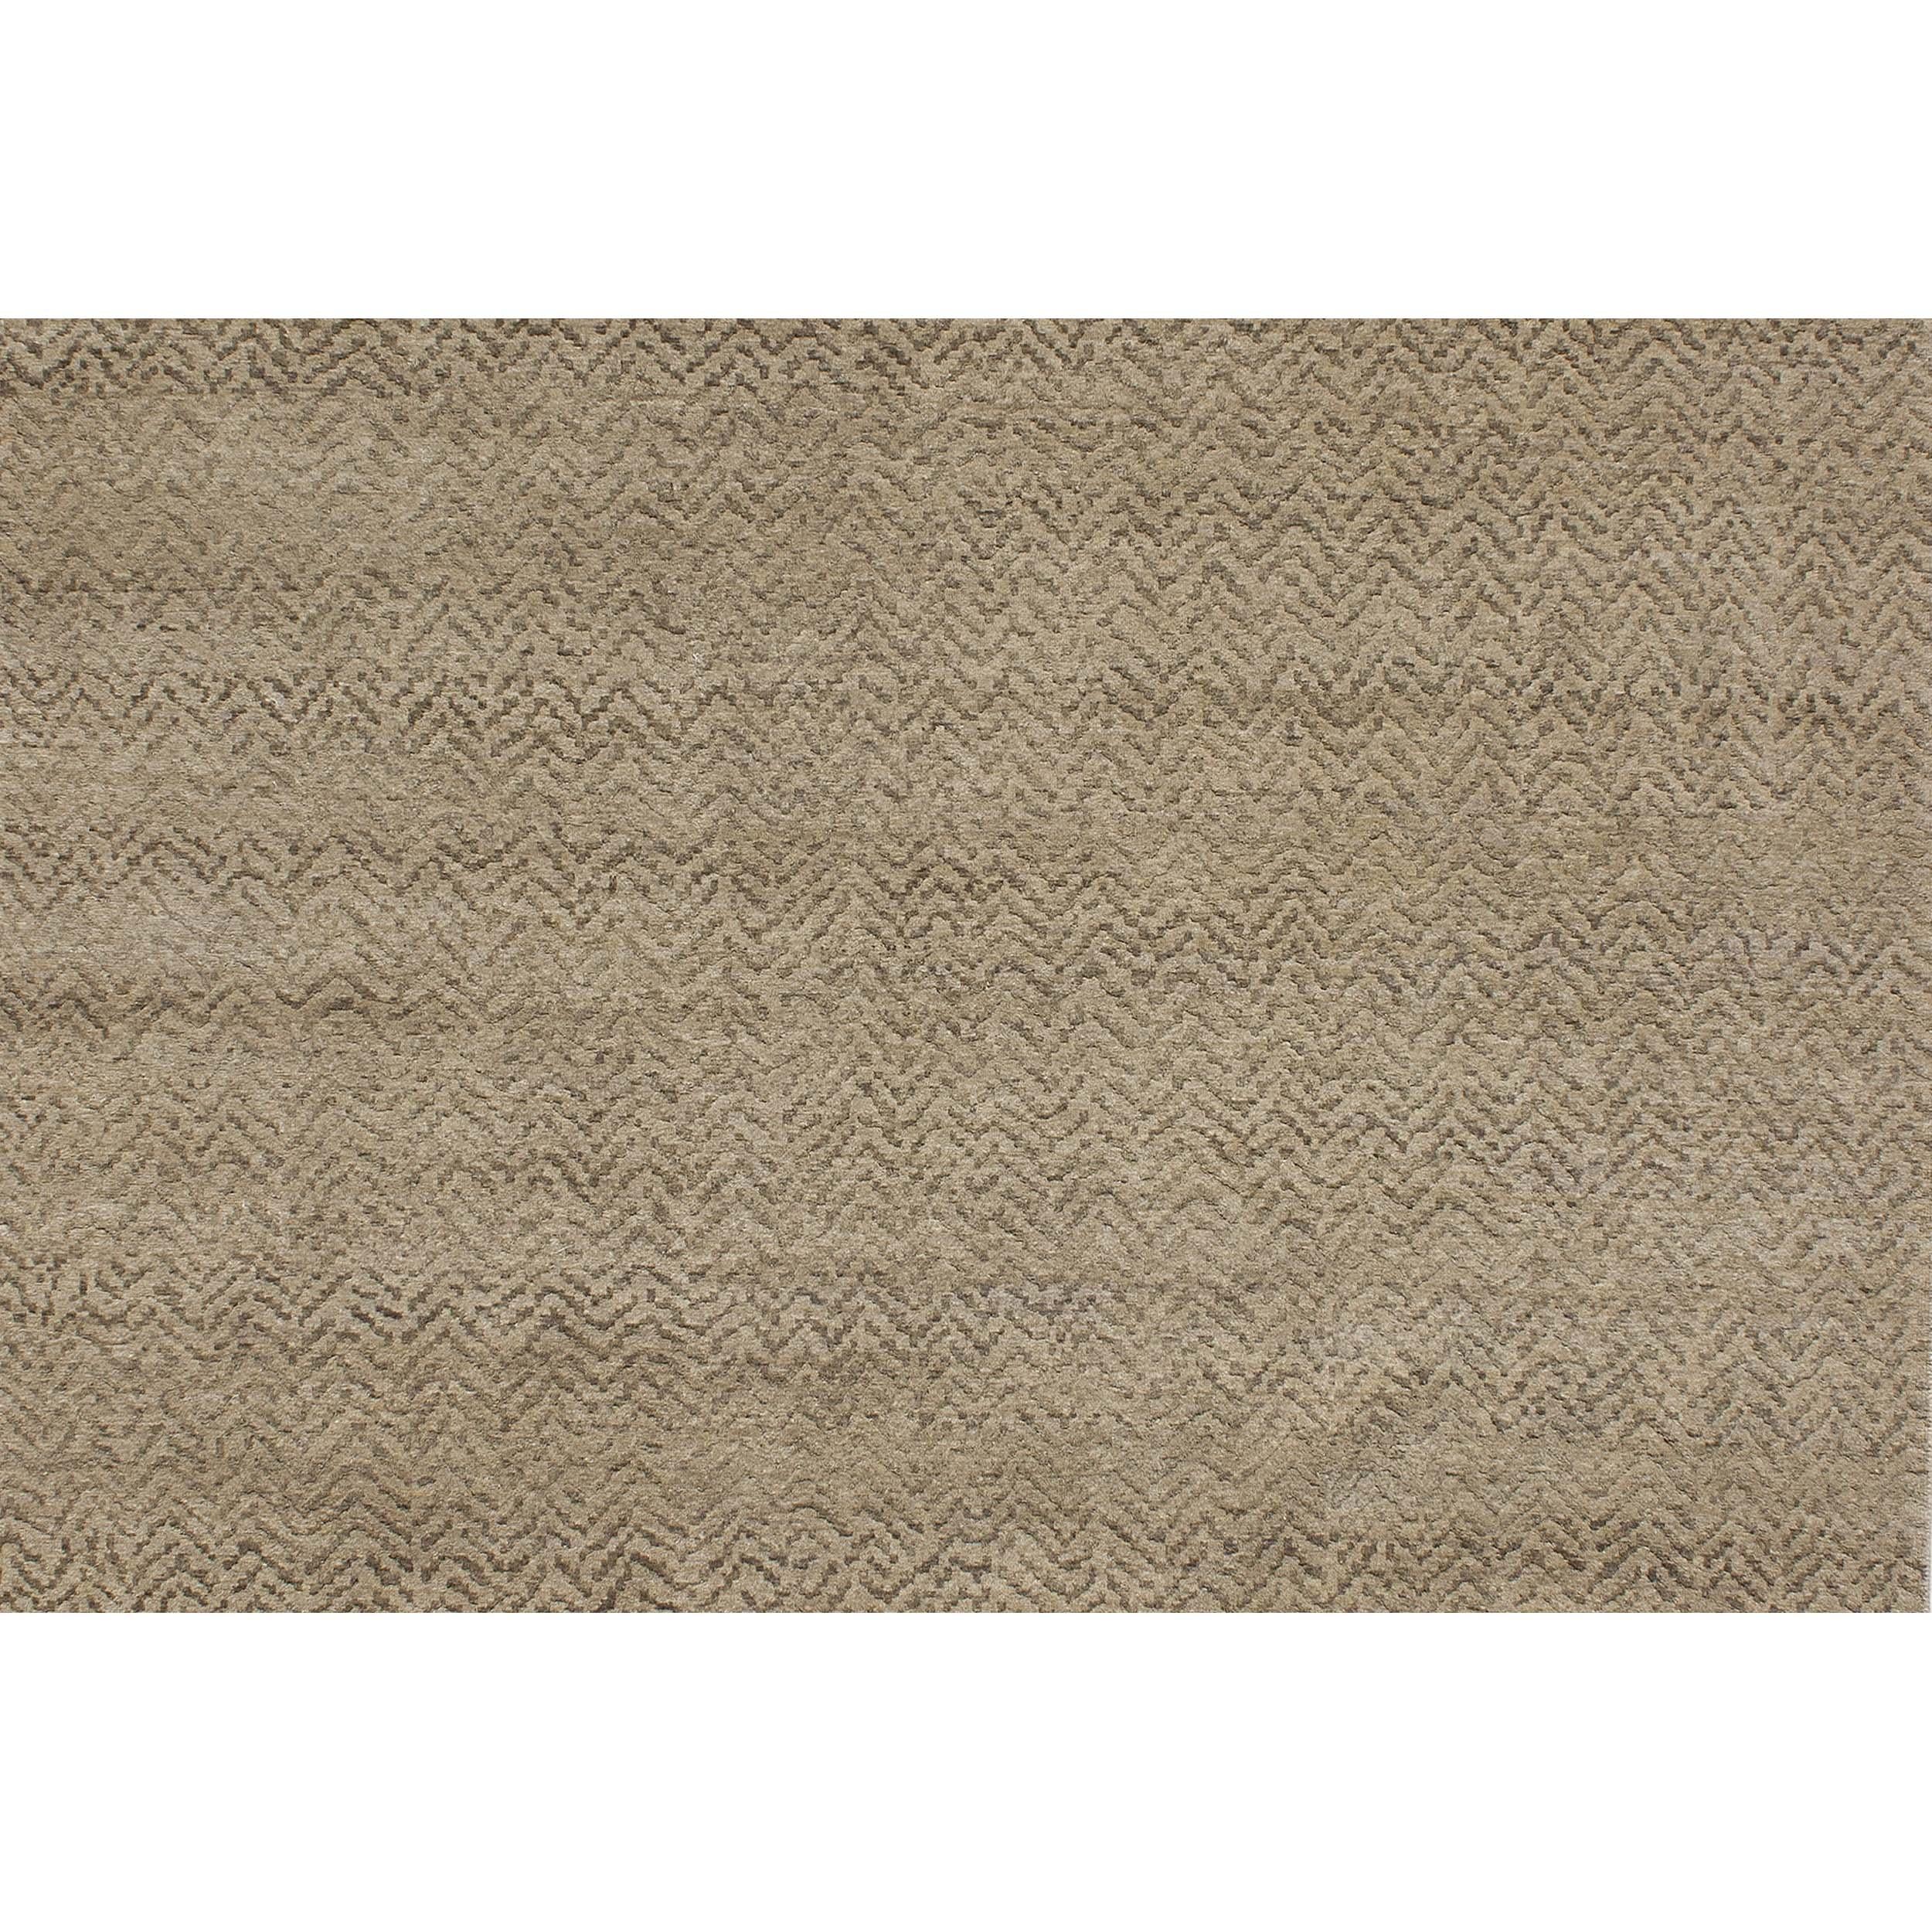 This exquisite modern hand-knotted rug from India offers a delightful sensory experience, captivating both touch and sight with its luscious hand-loomed design. Made with lustrous wool creates a surface that is not only incredibly soft to the touch